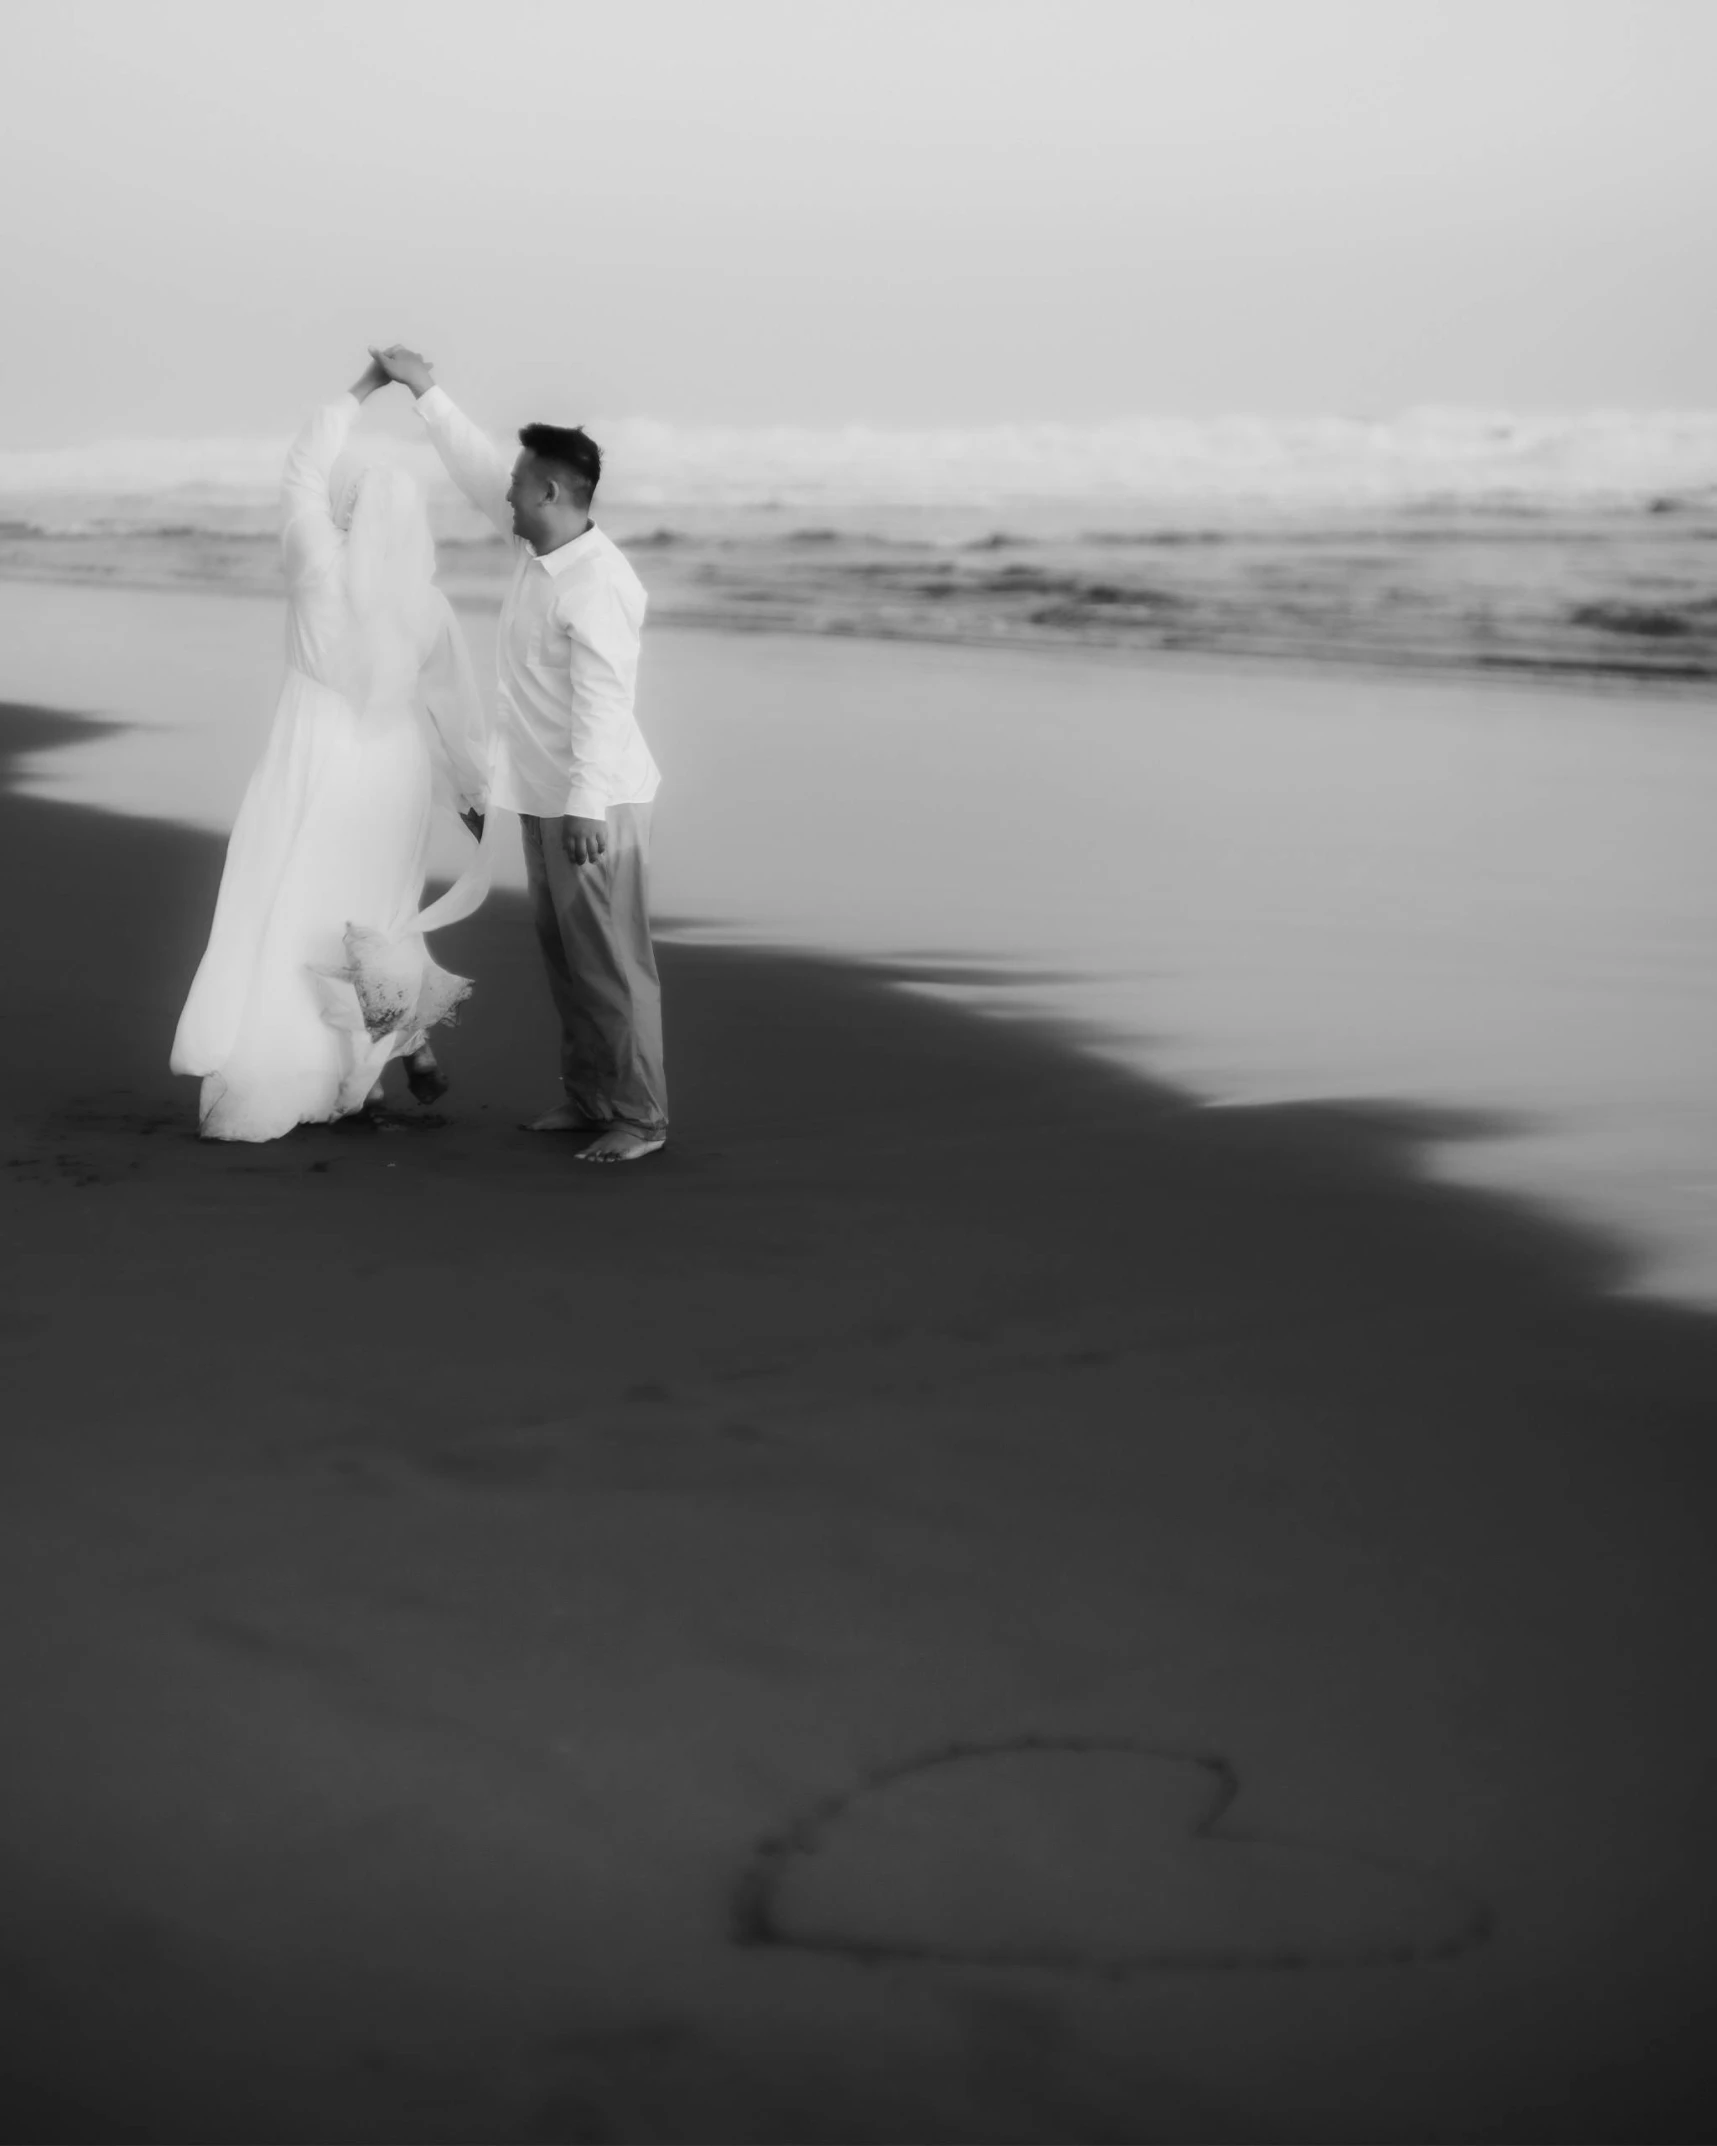 a bride and groom walk together on a beach